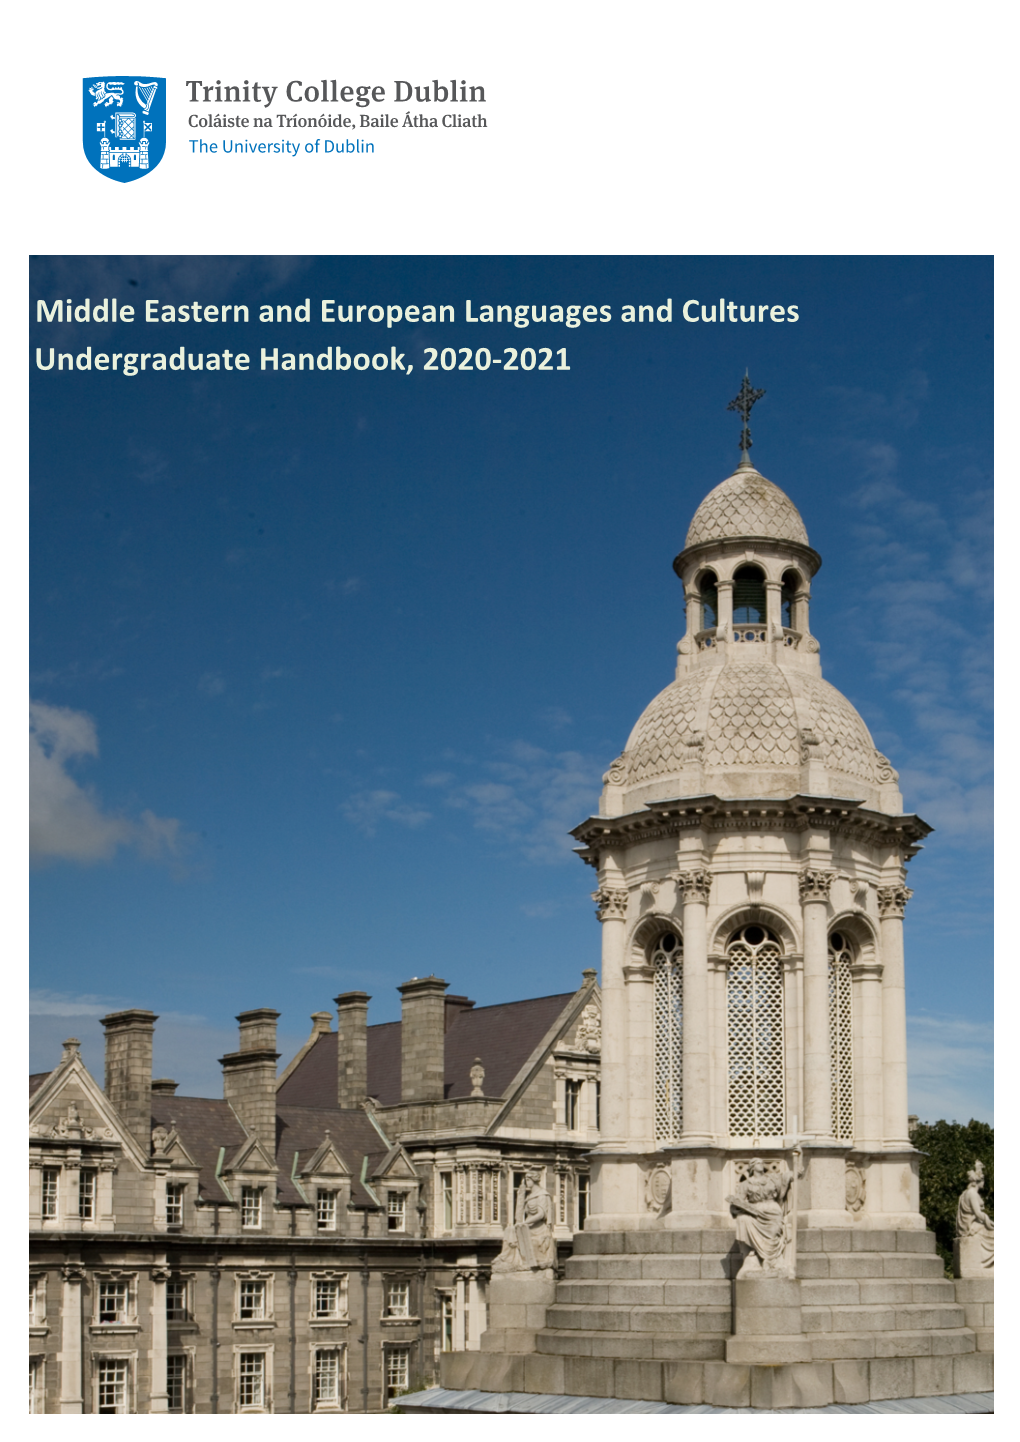 Middle Eastern and European Languages and Cultures Undergraduate Handbook, 2020-2021